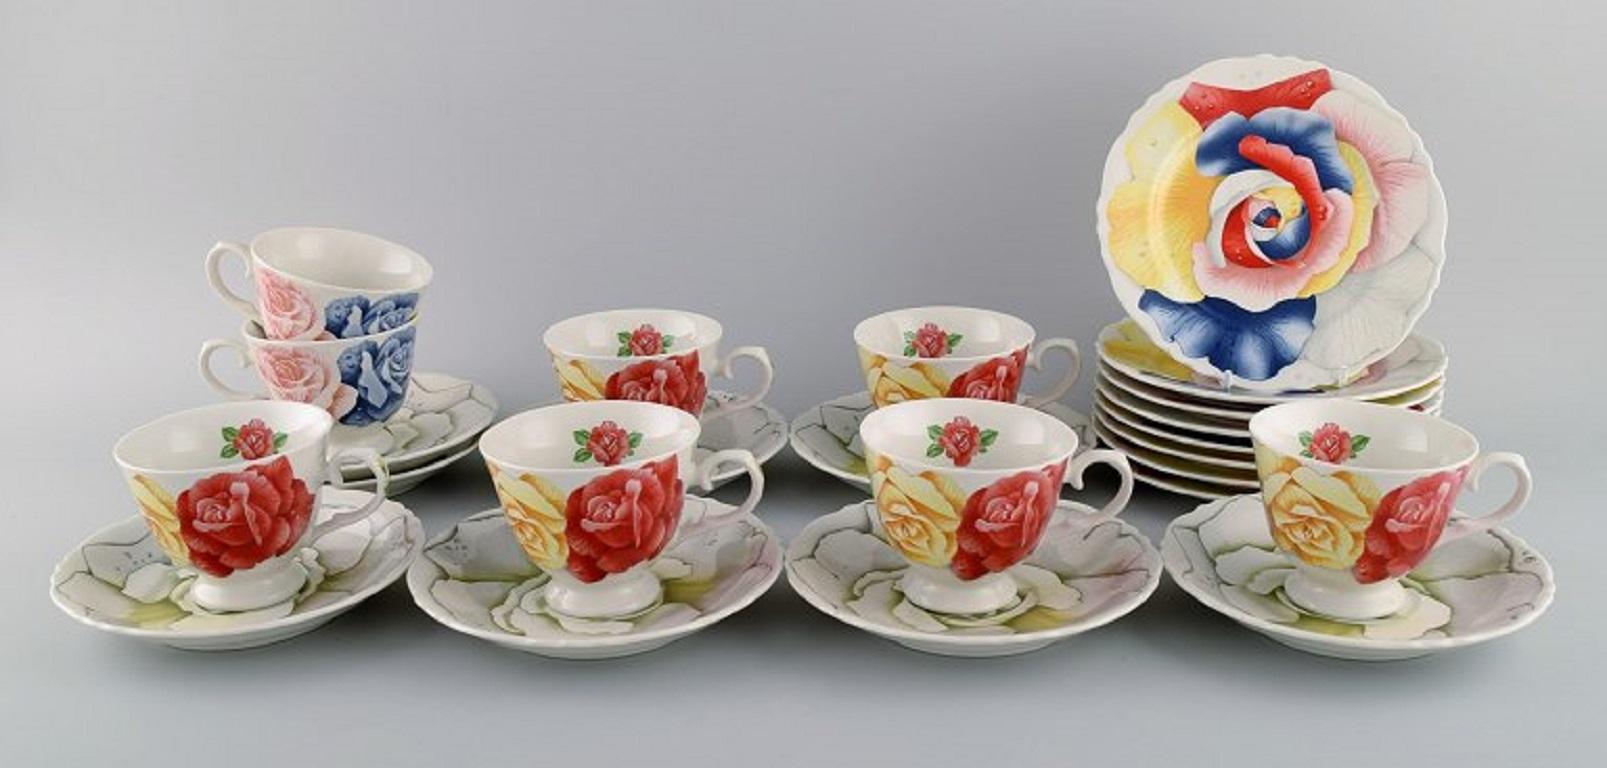 Emilio Bergamin for Taitù. Romantica coffee service for eight people in porcelain with flowers. 
Dated 1994.
The cup measures: 8.7 x 7 cm.
Saucer diameter: 15.5 cm.
Plate diameter: 16.7 cm.
In excellent condition.
Stamped.